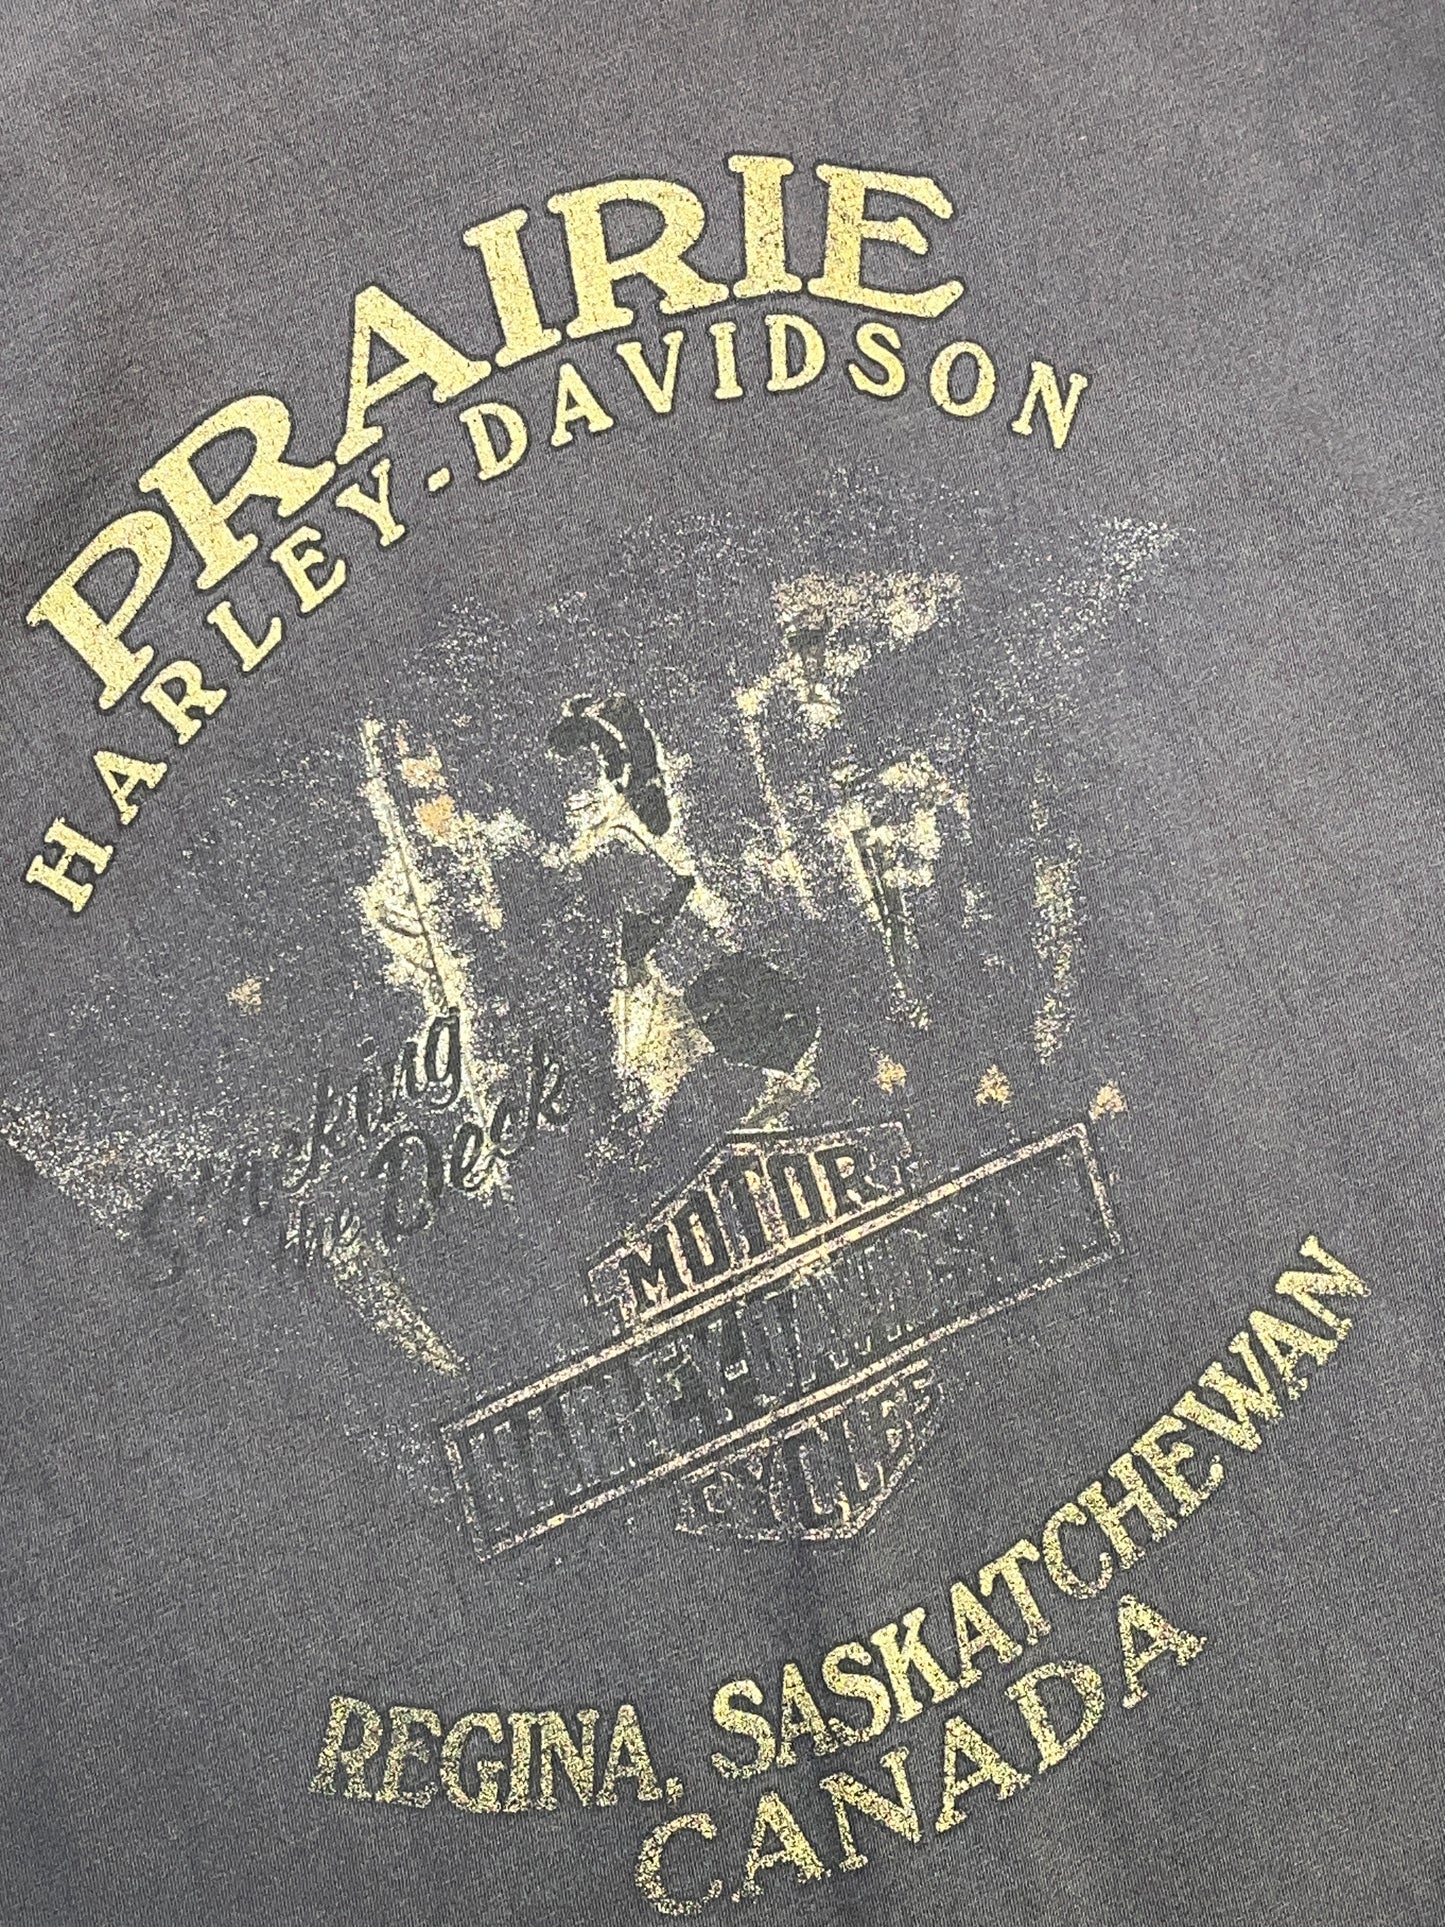 Vintage Harley Davidson T-Shirt Feeling Lucky Praire Canada Faded